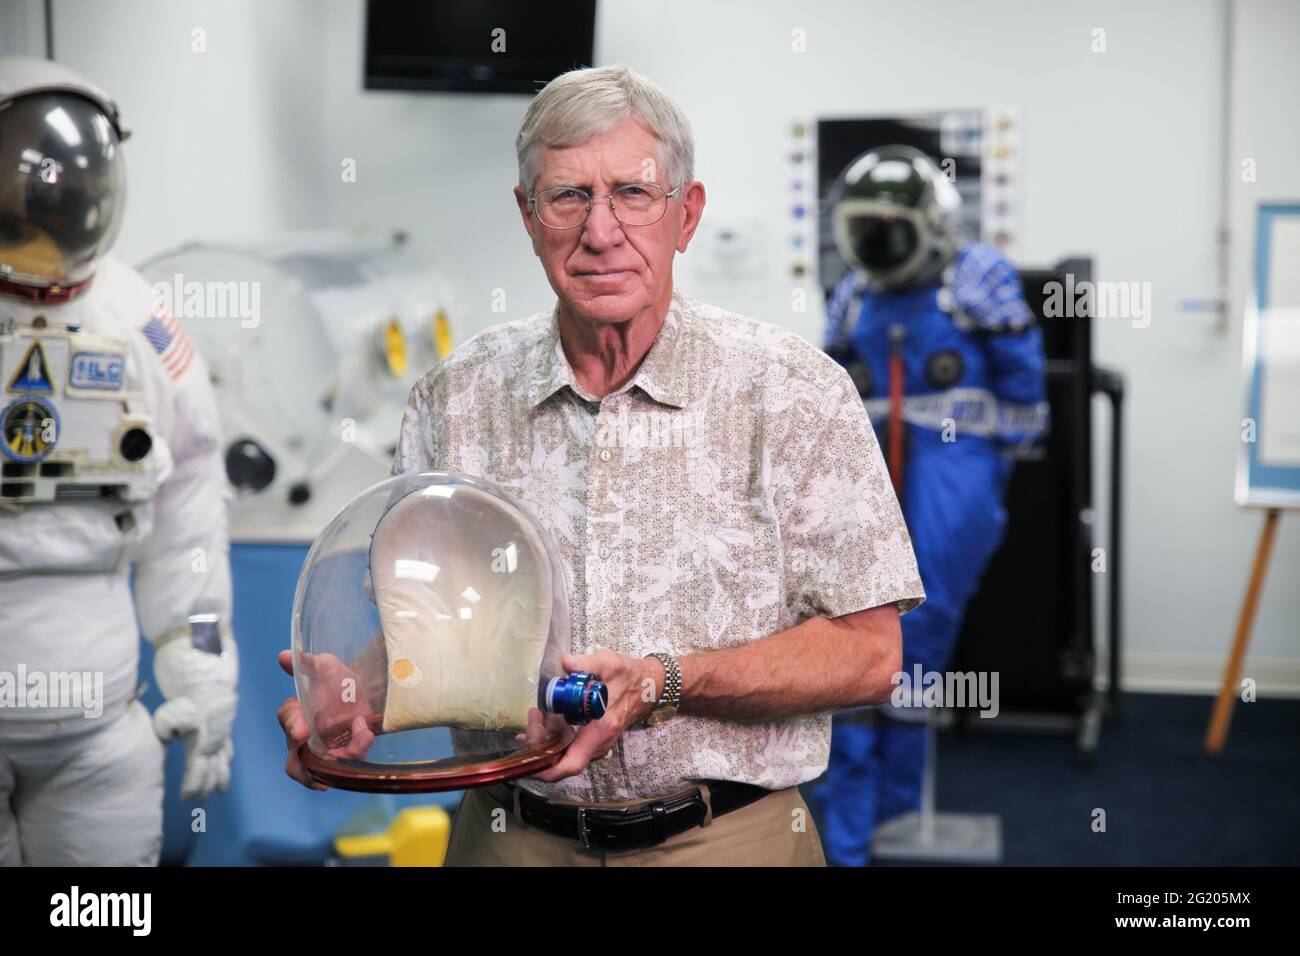 FREDERICA, DE, USA - JUNE 20, 2014: Homer Sonny Reihm led the group at ILC Industries creating the Space Suit for the Apollo moon missions. Stock Photo